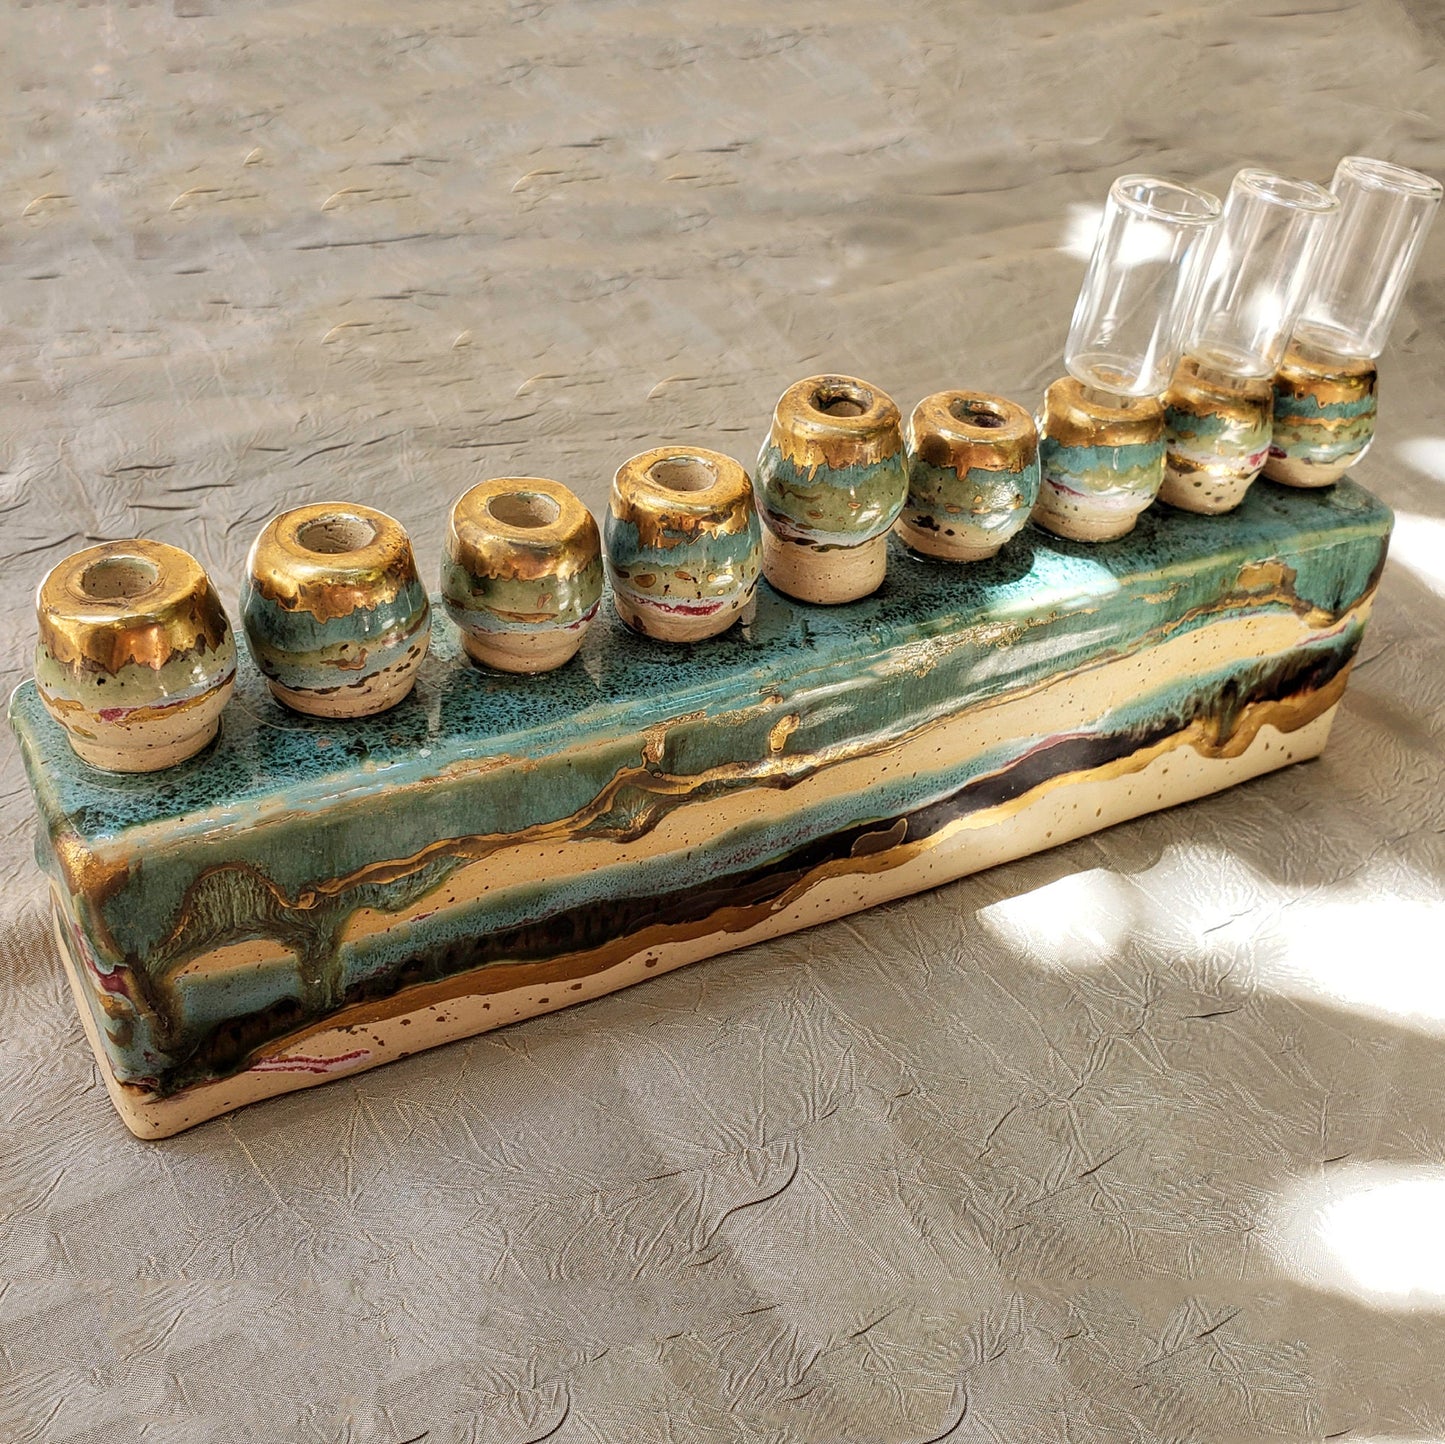 RESERVED UNTIL NOV. 9 - Hand-Built Menorah | 22k Gold Accents | Made in Israel